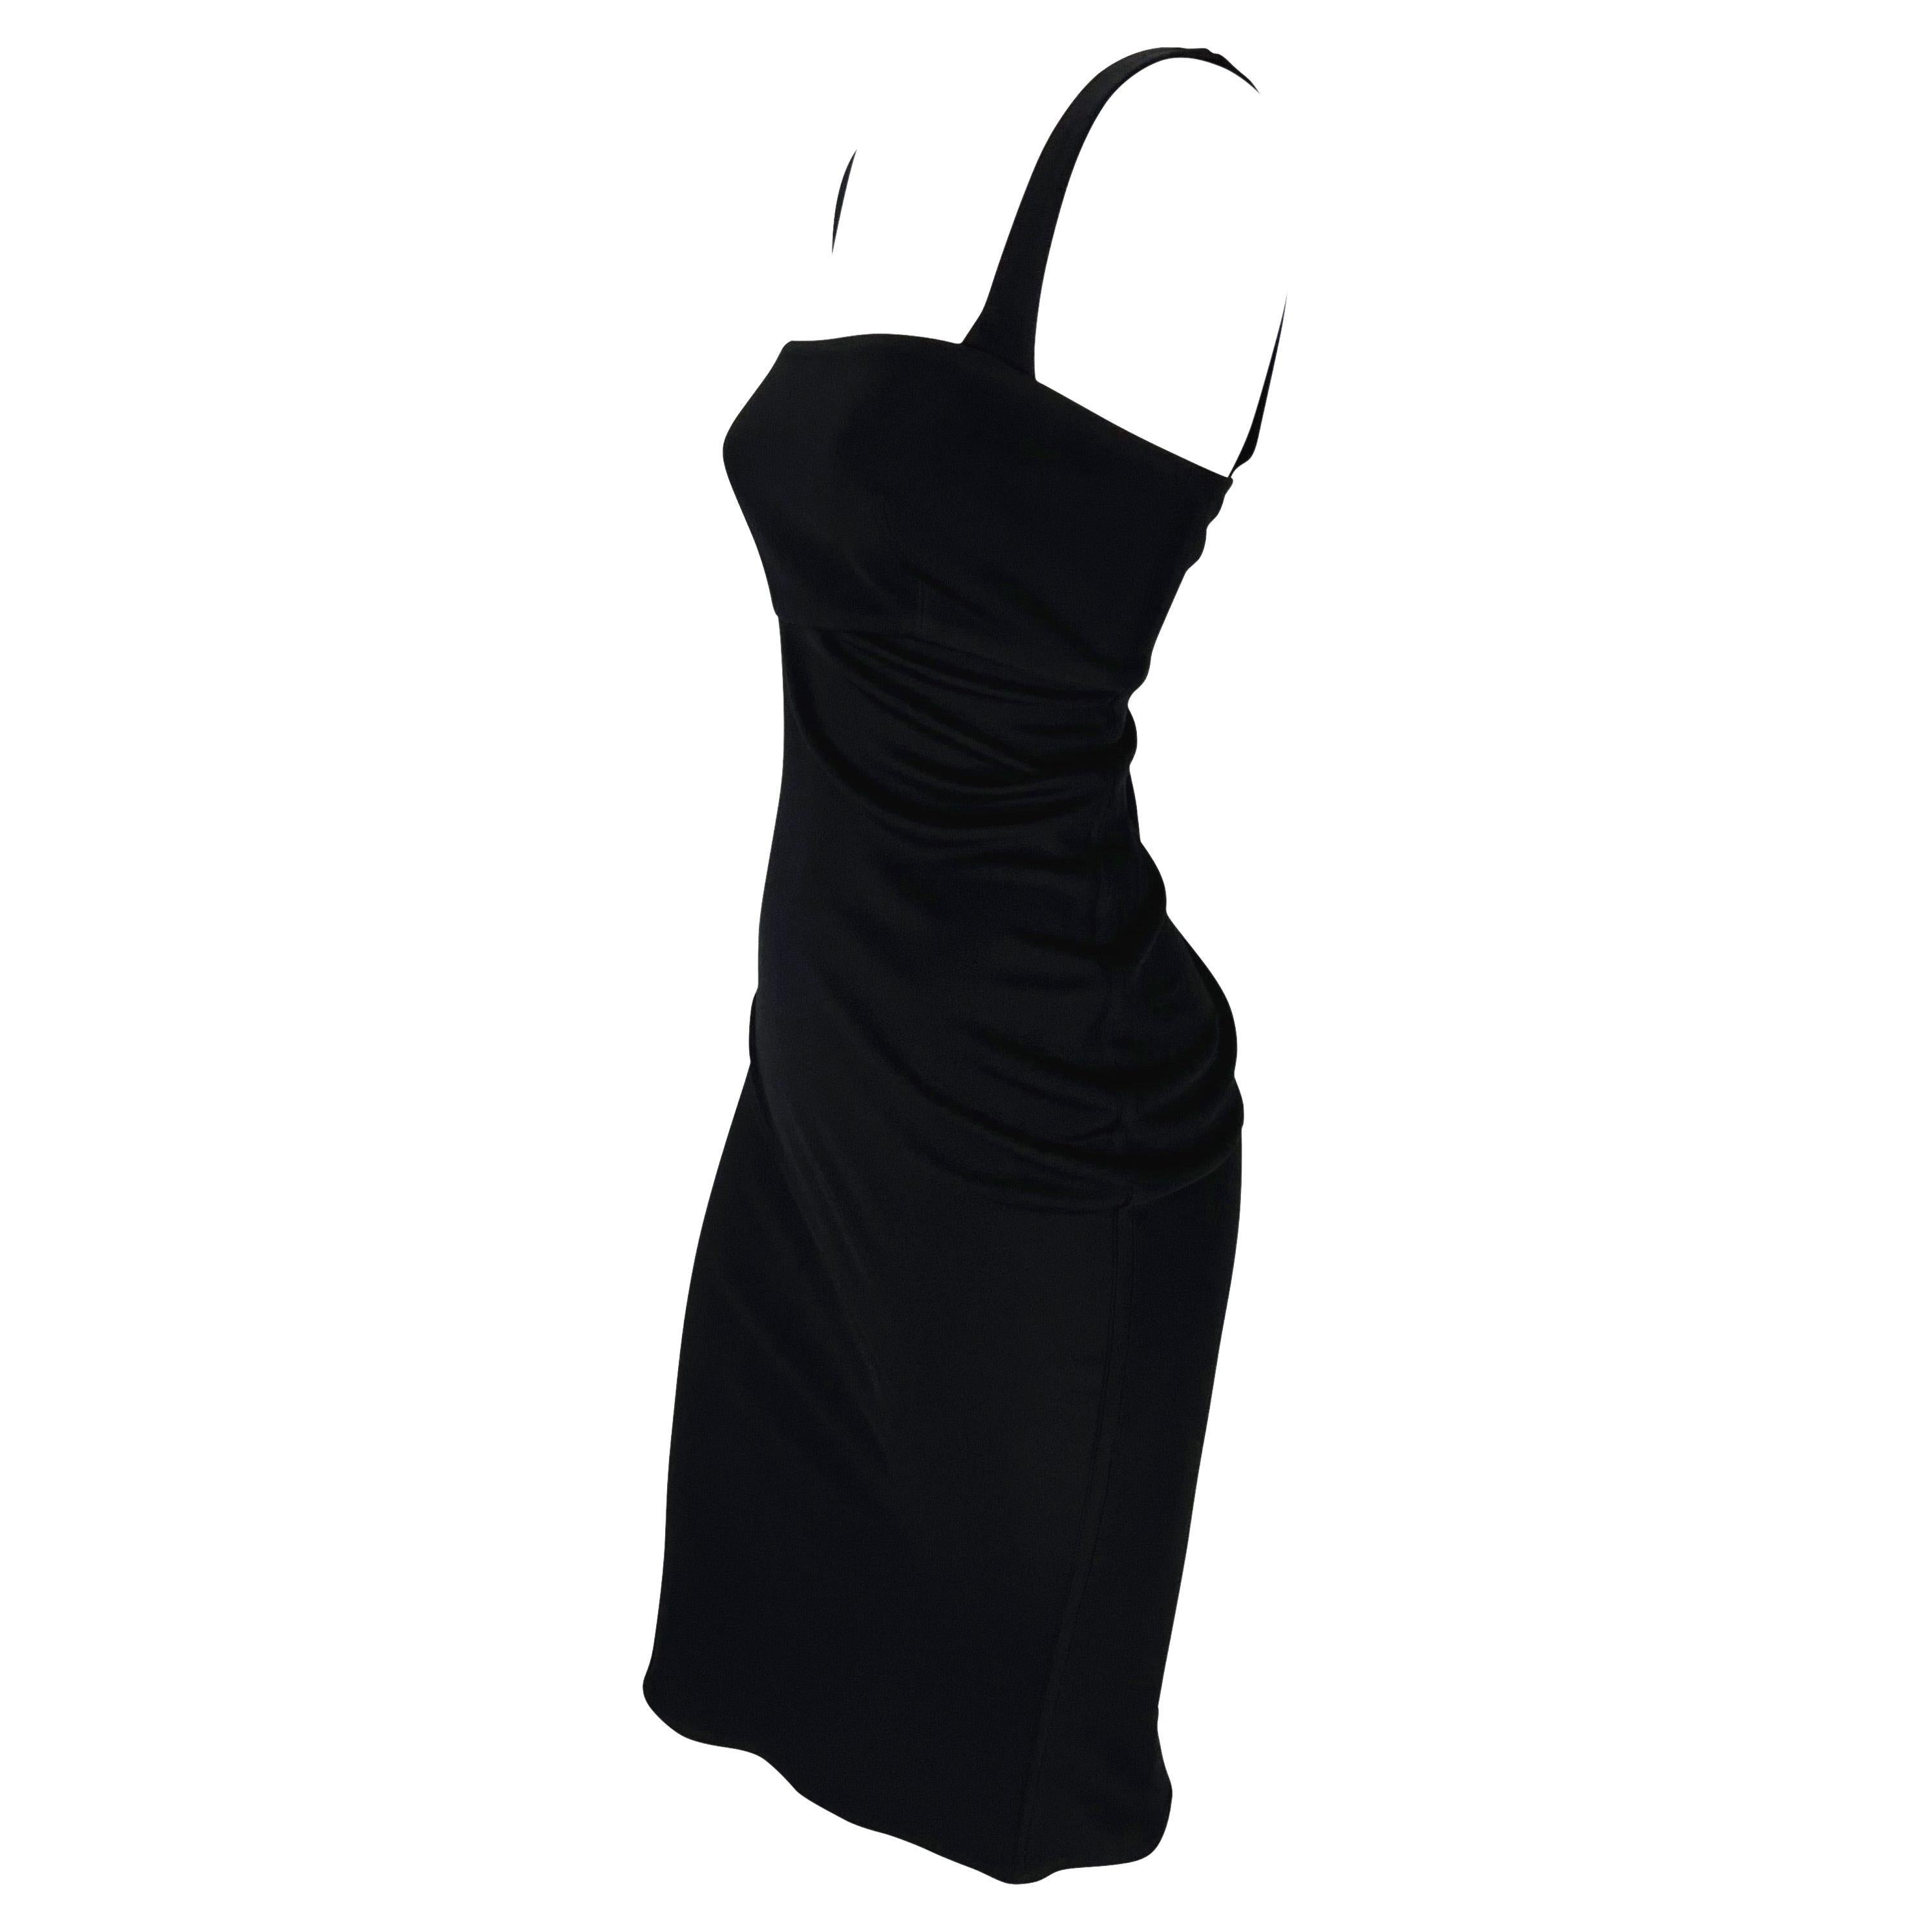 Presenting a sensual black Gianni Versace cocktail dress, designed by Gianni Versace. From the Fall/Winter 1997 collection, this little black dress features wide straps and a square neckline. The dress is made complete with an asymmetrical cut that